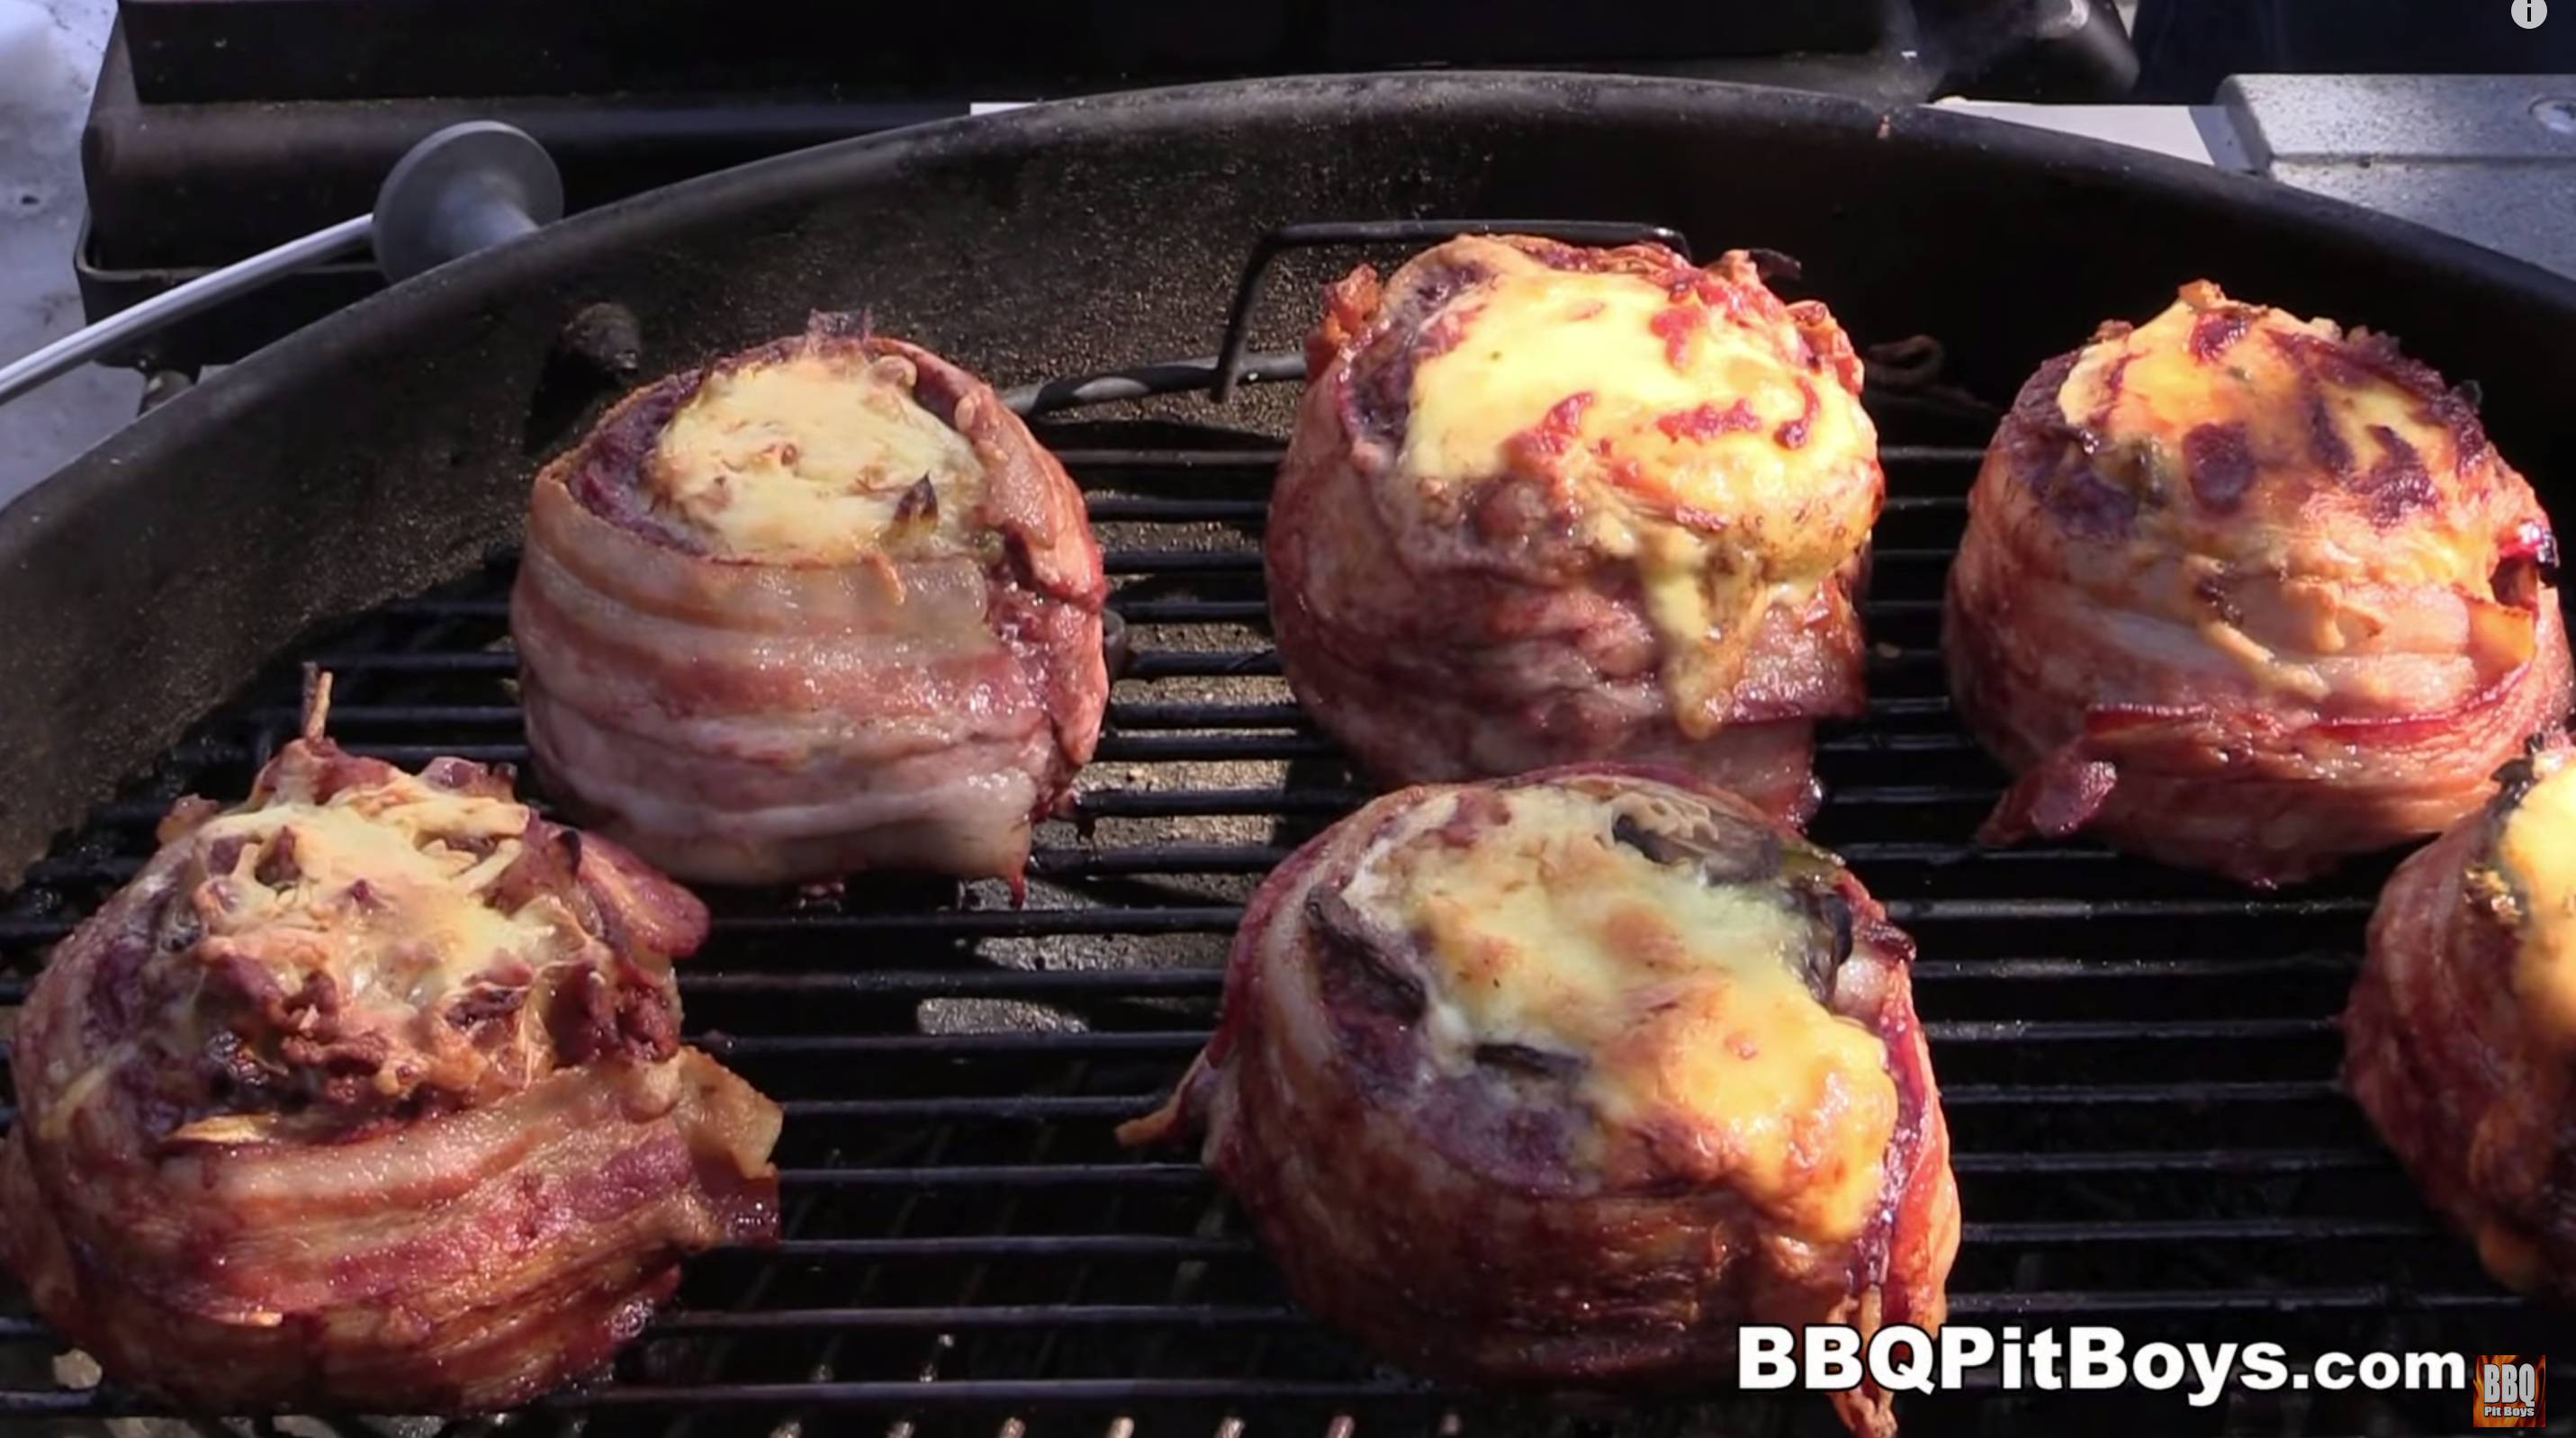 Stuffed Beer Can Burgers q Pit Boys Most Extreme Burger Recipe